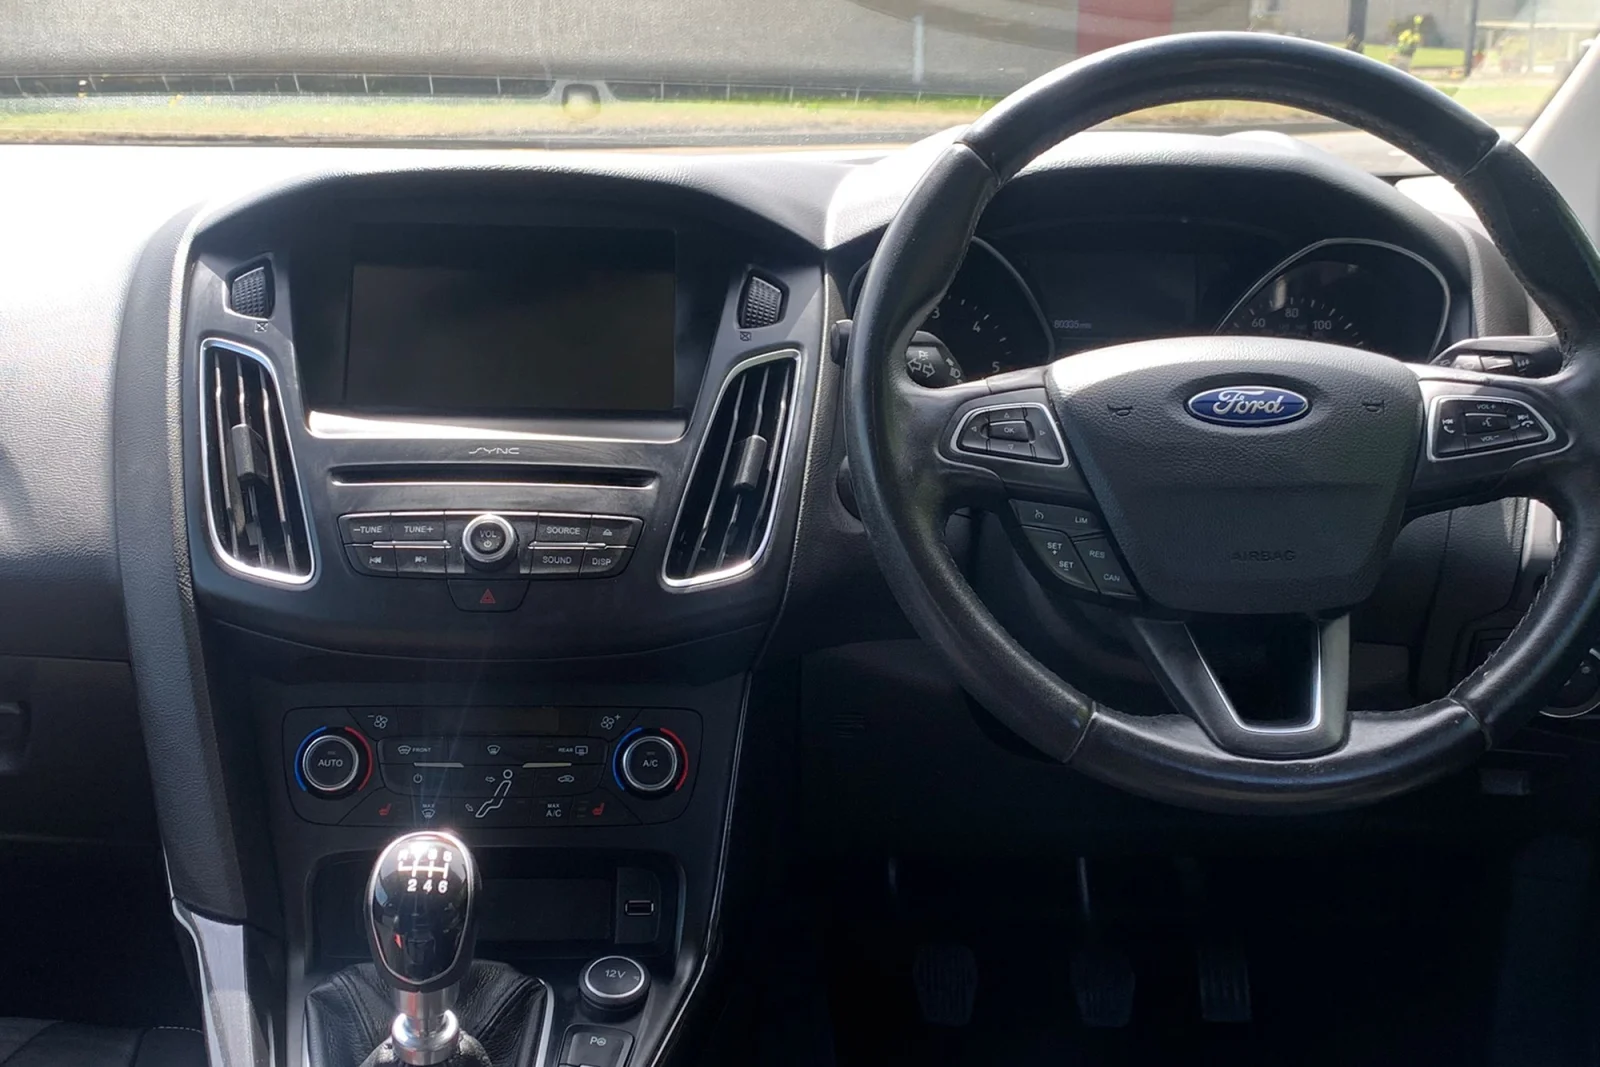 Ford-Focus-Interior-Dashboard-scaled.webp